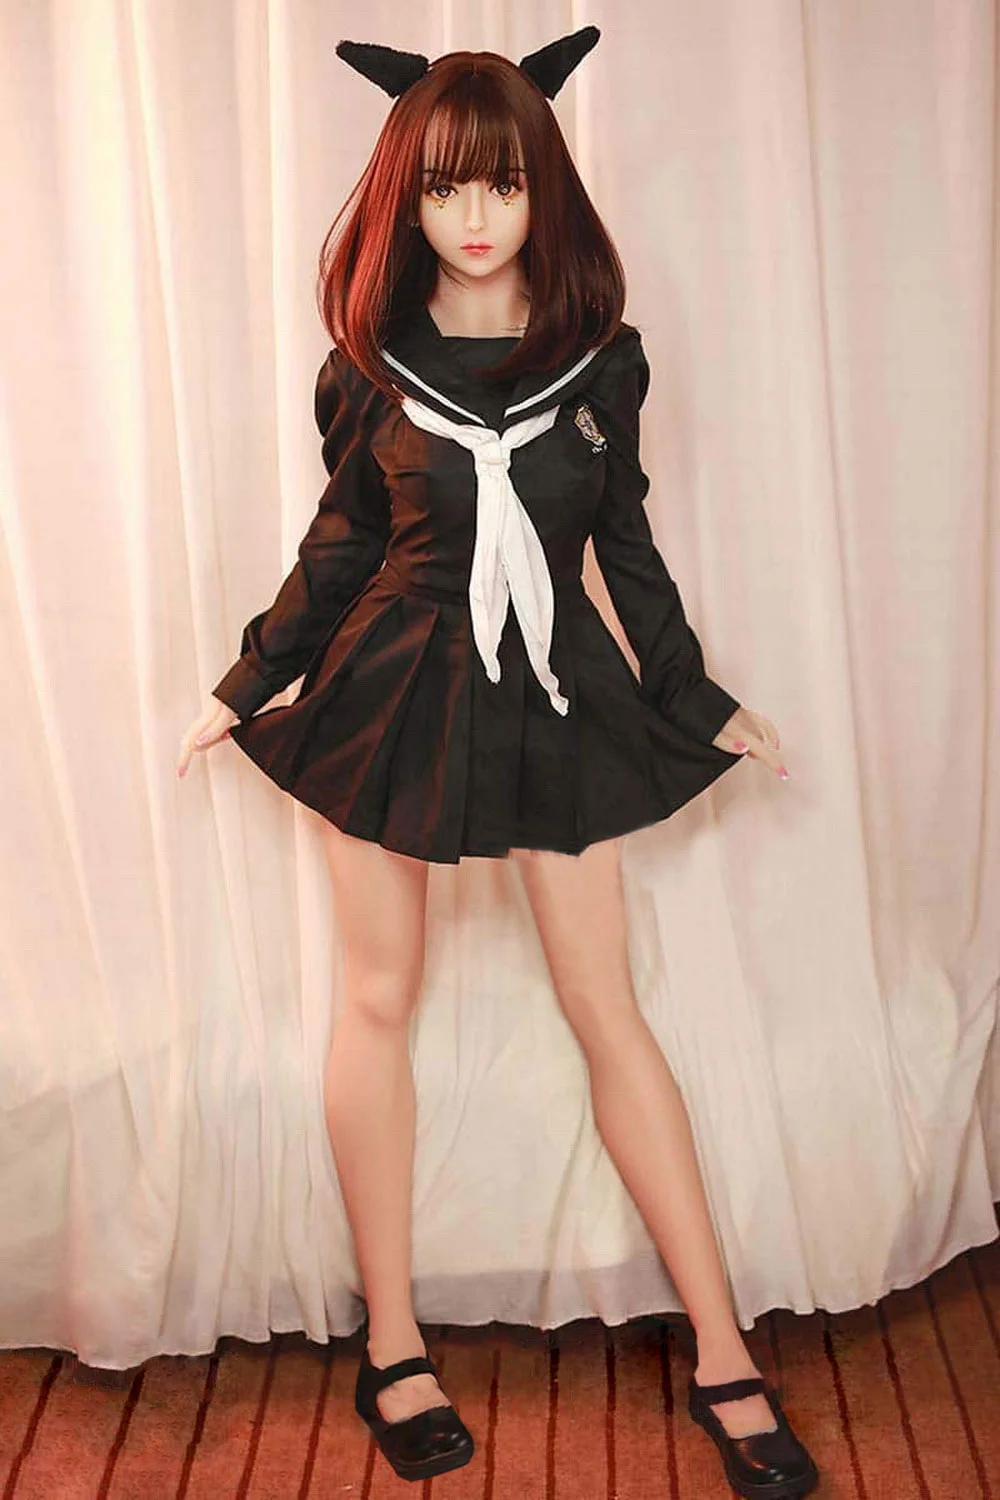 Anime sex doll with skirt horns in both hands